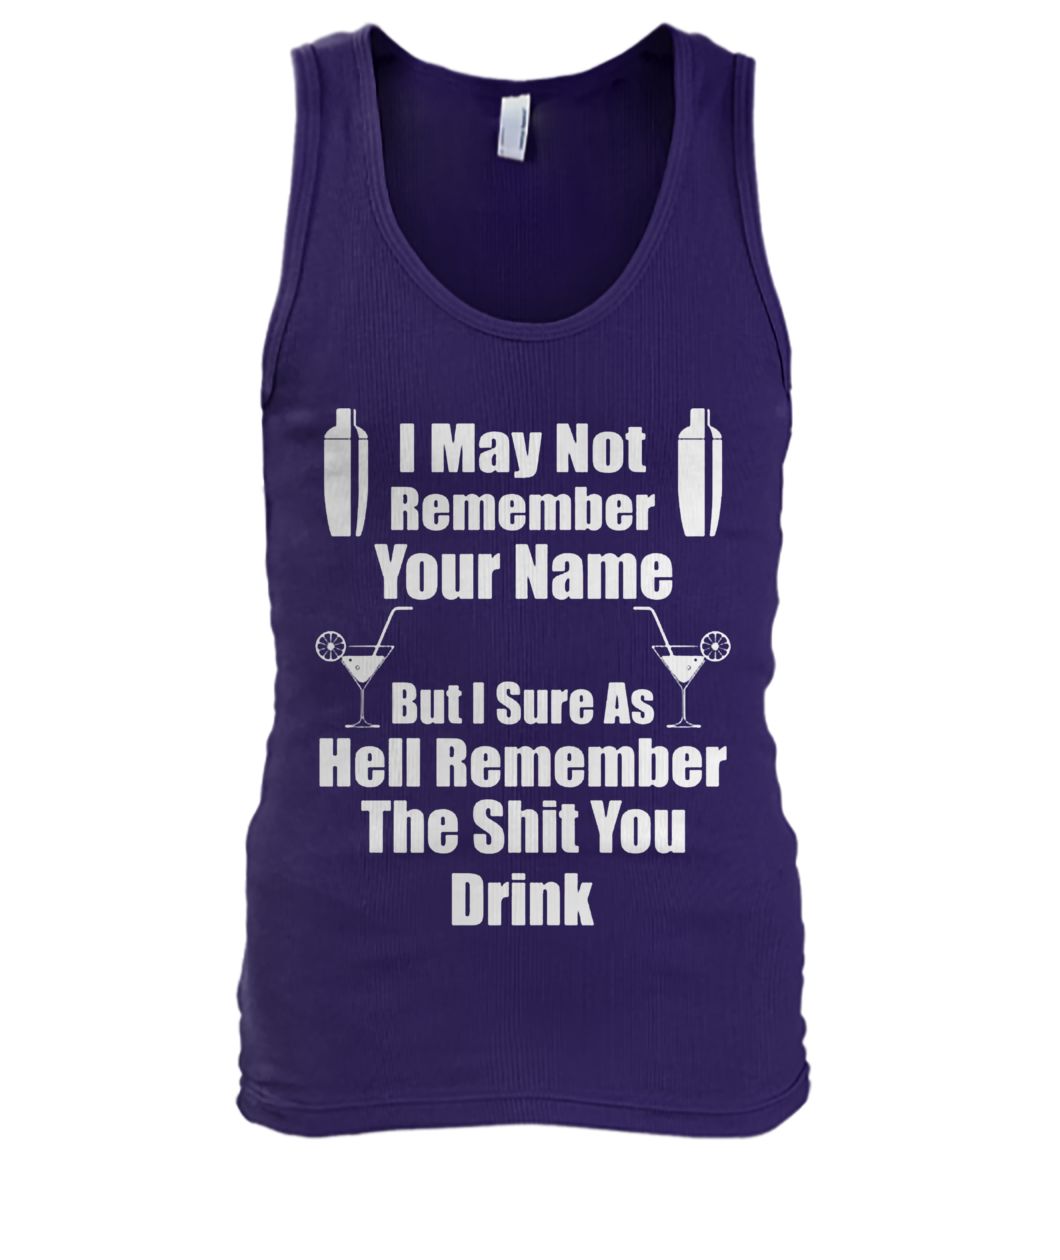 I may not remember your name but I sure as hell remember the shit you drink men's tank top